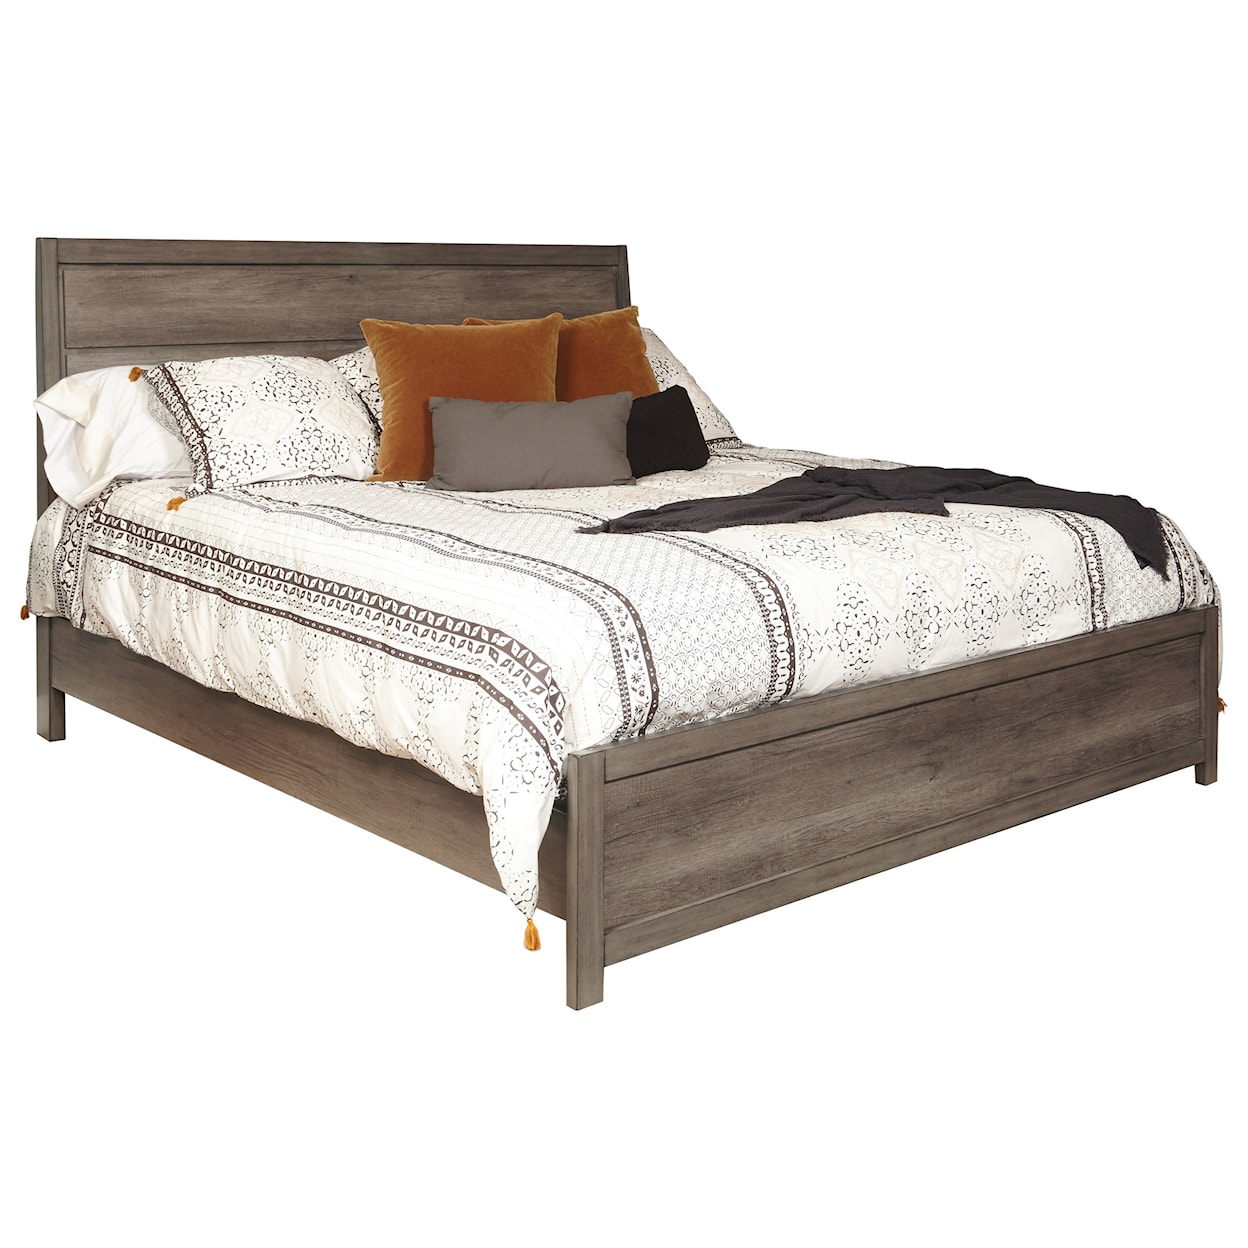 Samuel Lawrence Hanover Square Queen Panel Bed